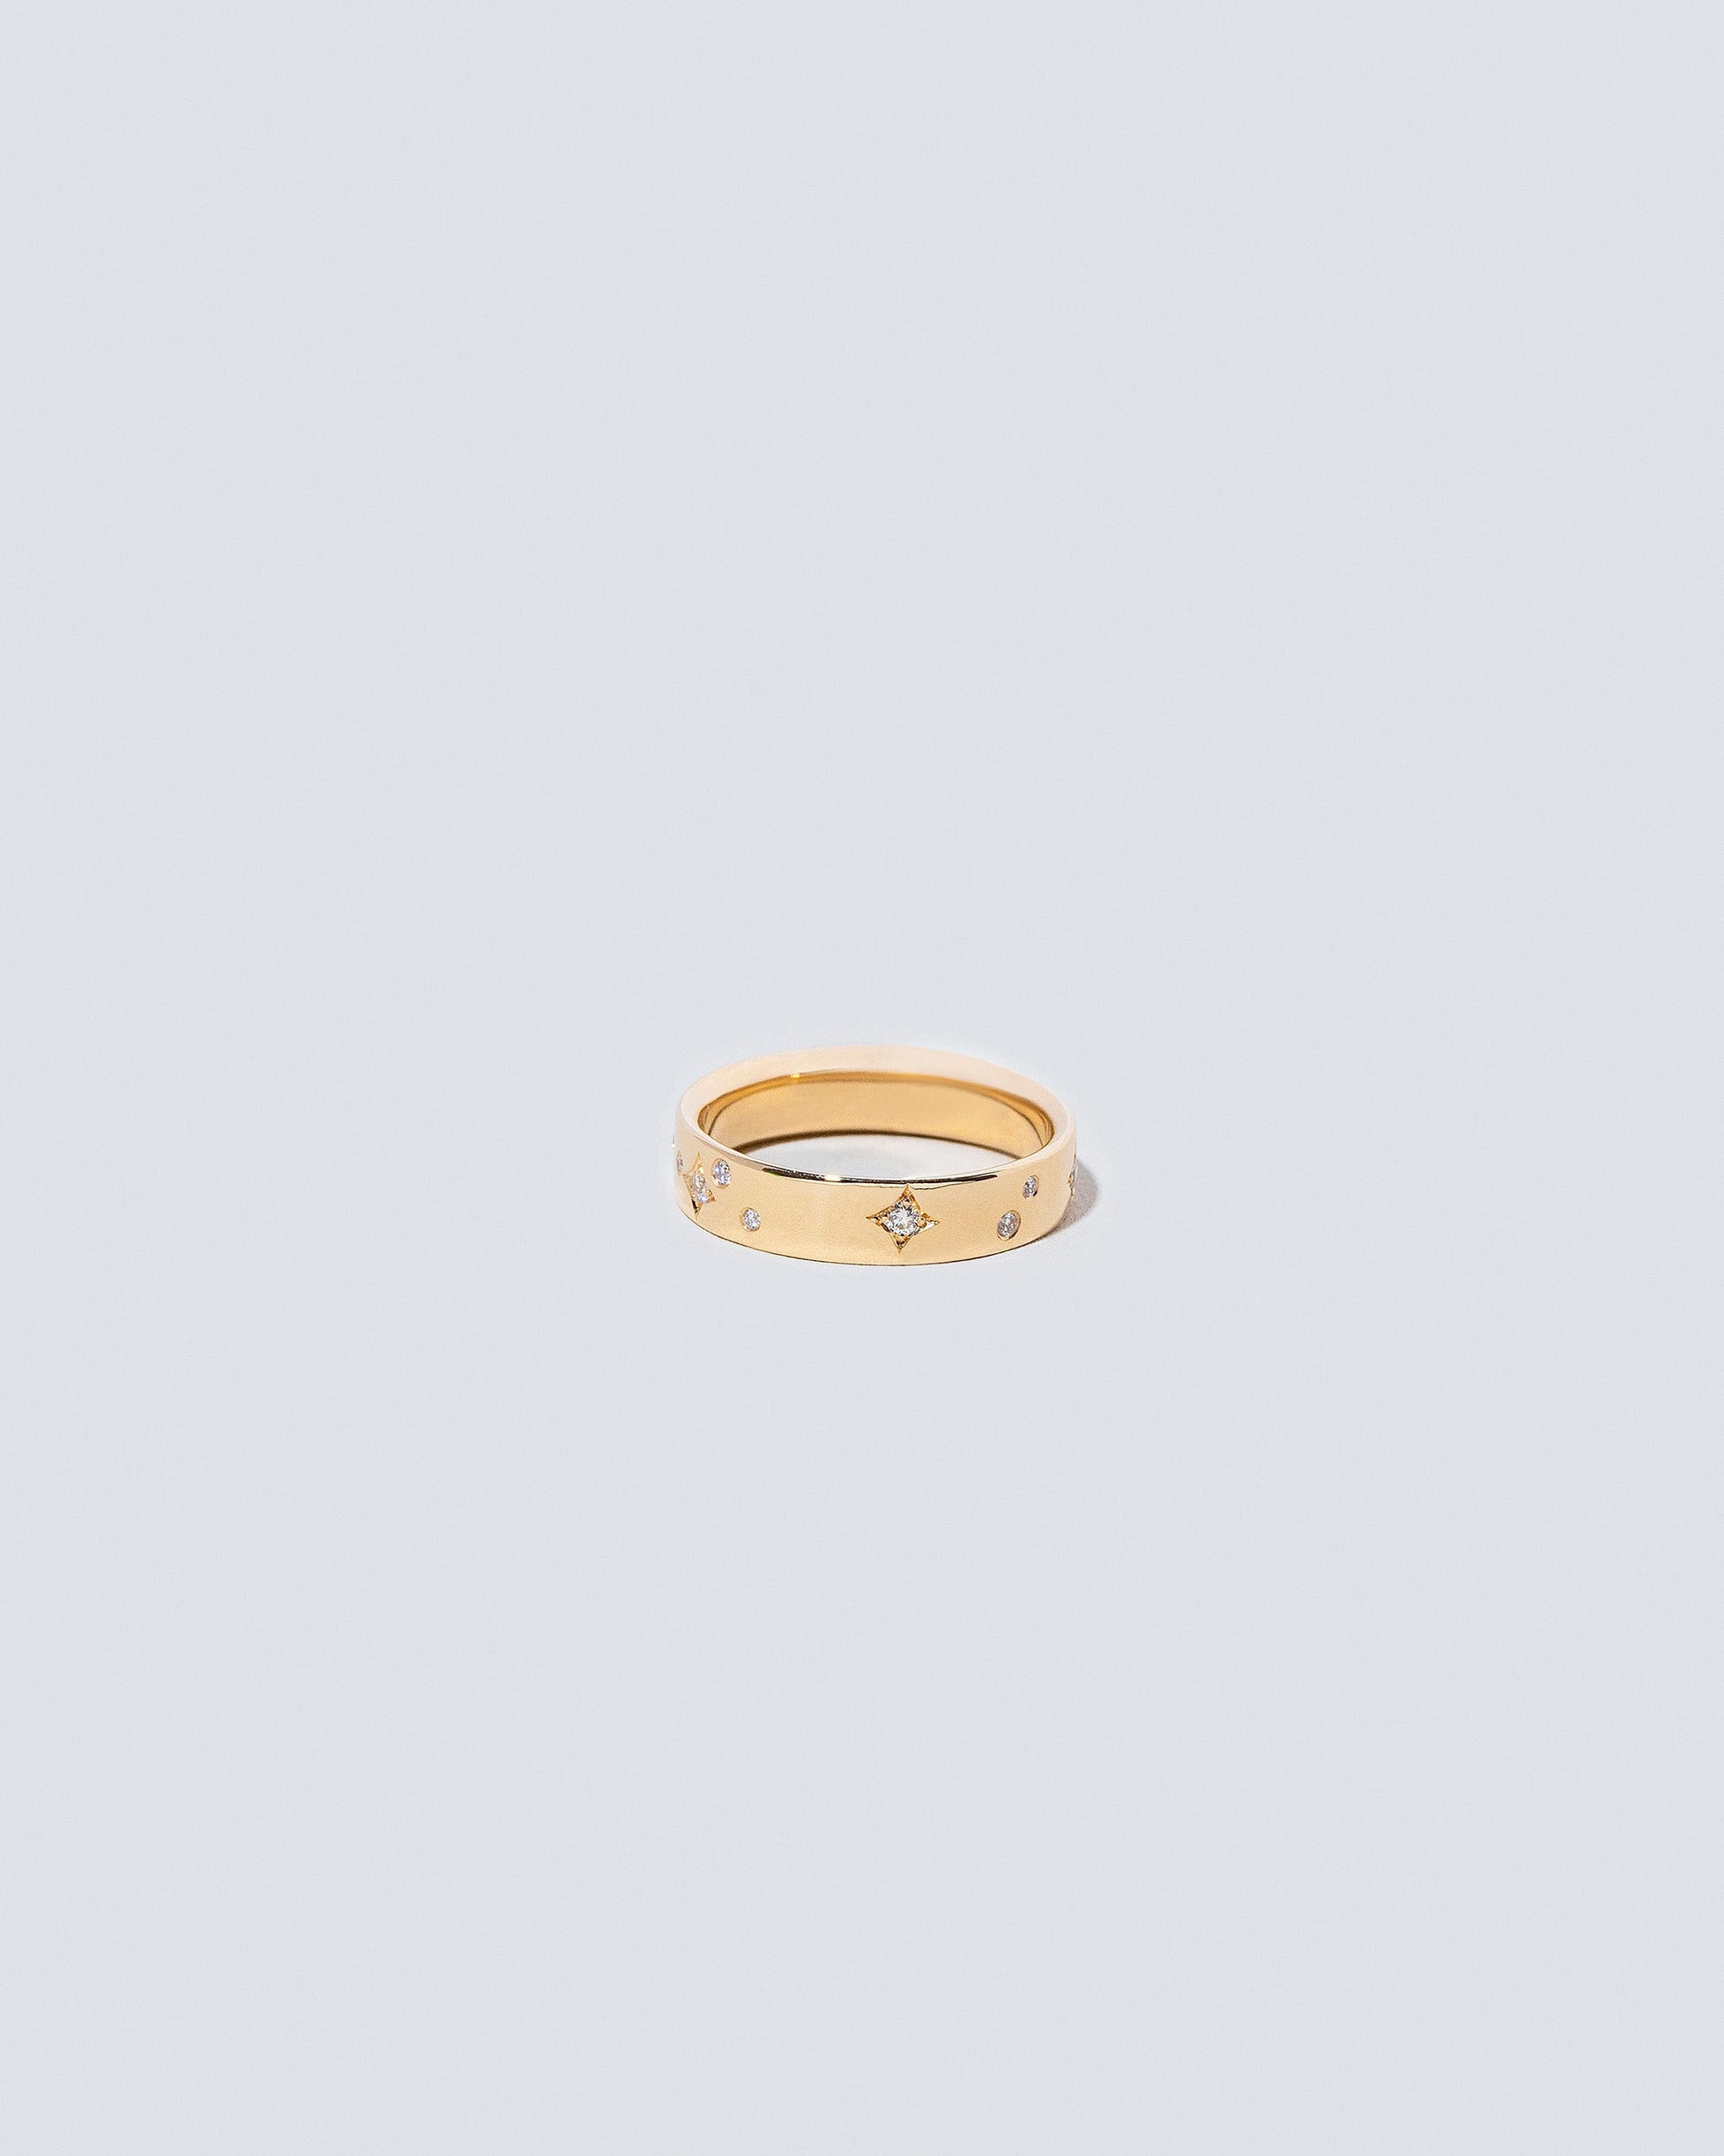 Gold 4mm Square Wire Band with Little Array White Diamonds added on light color background.